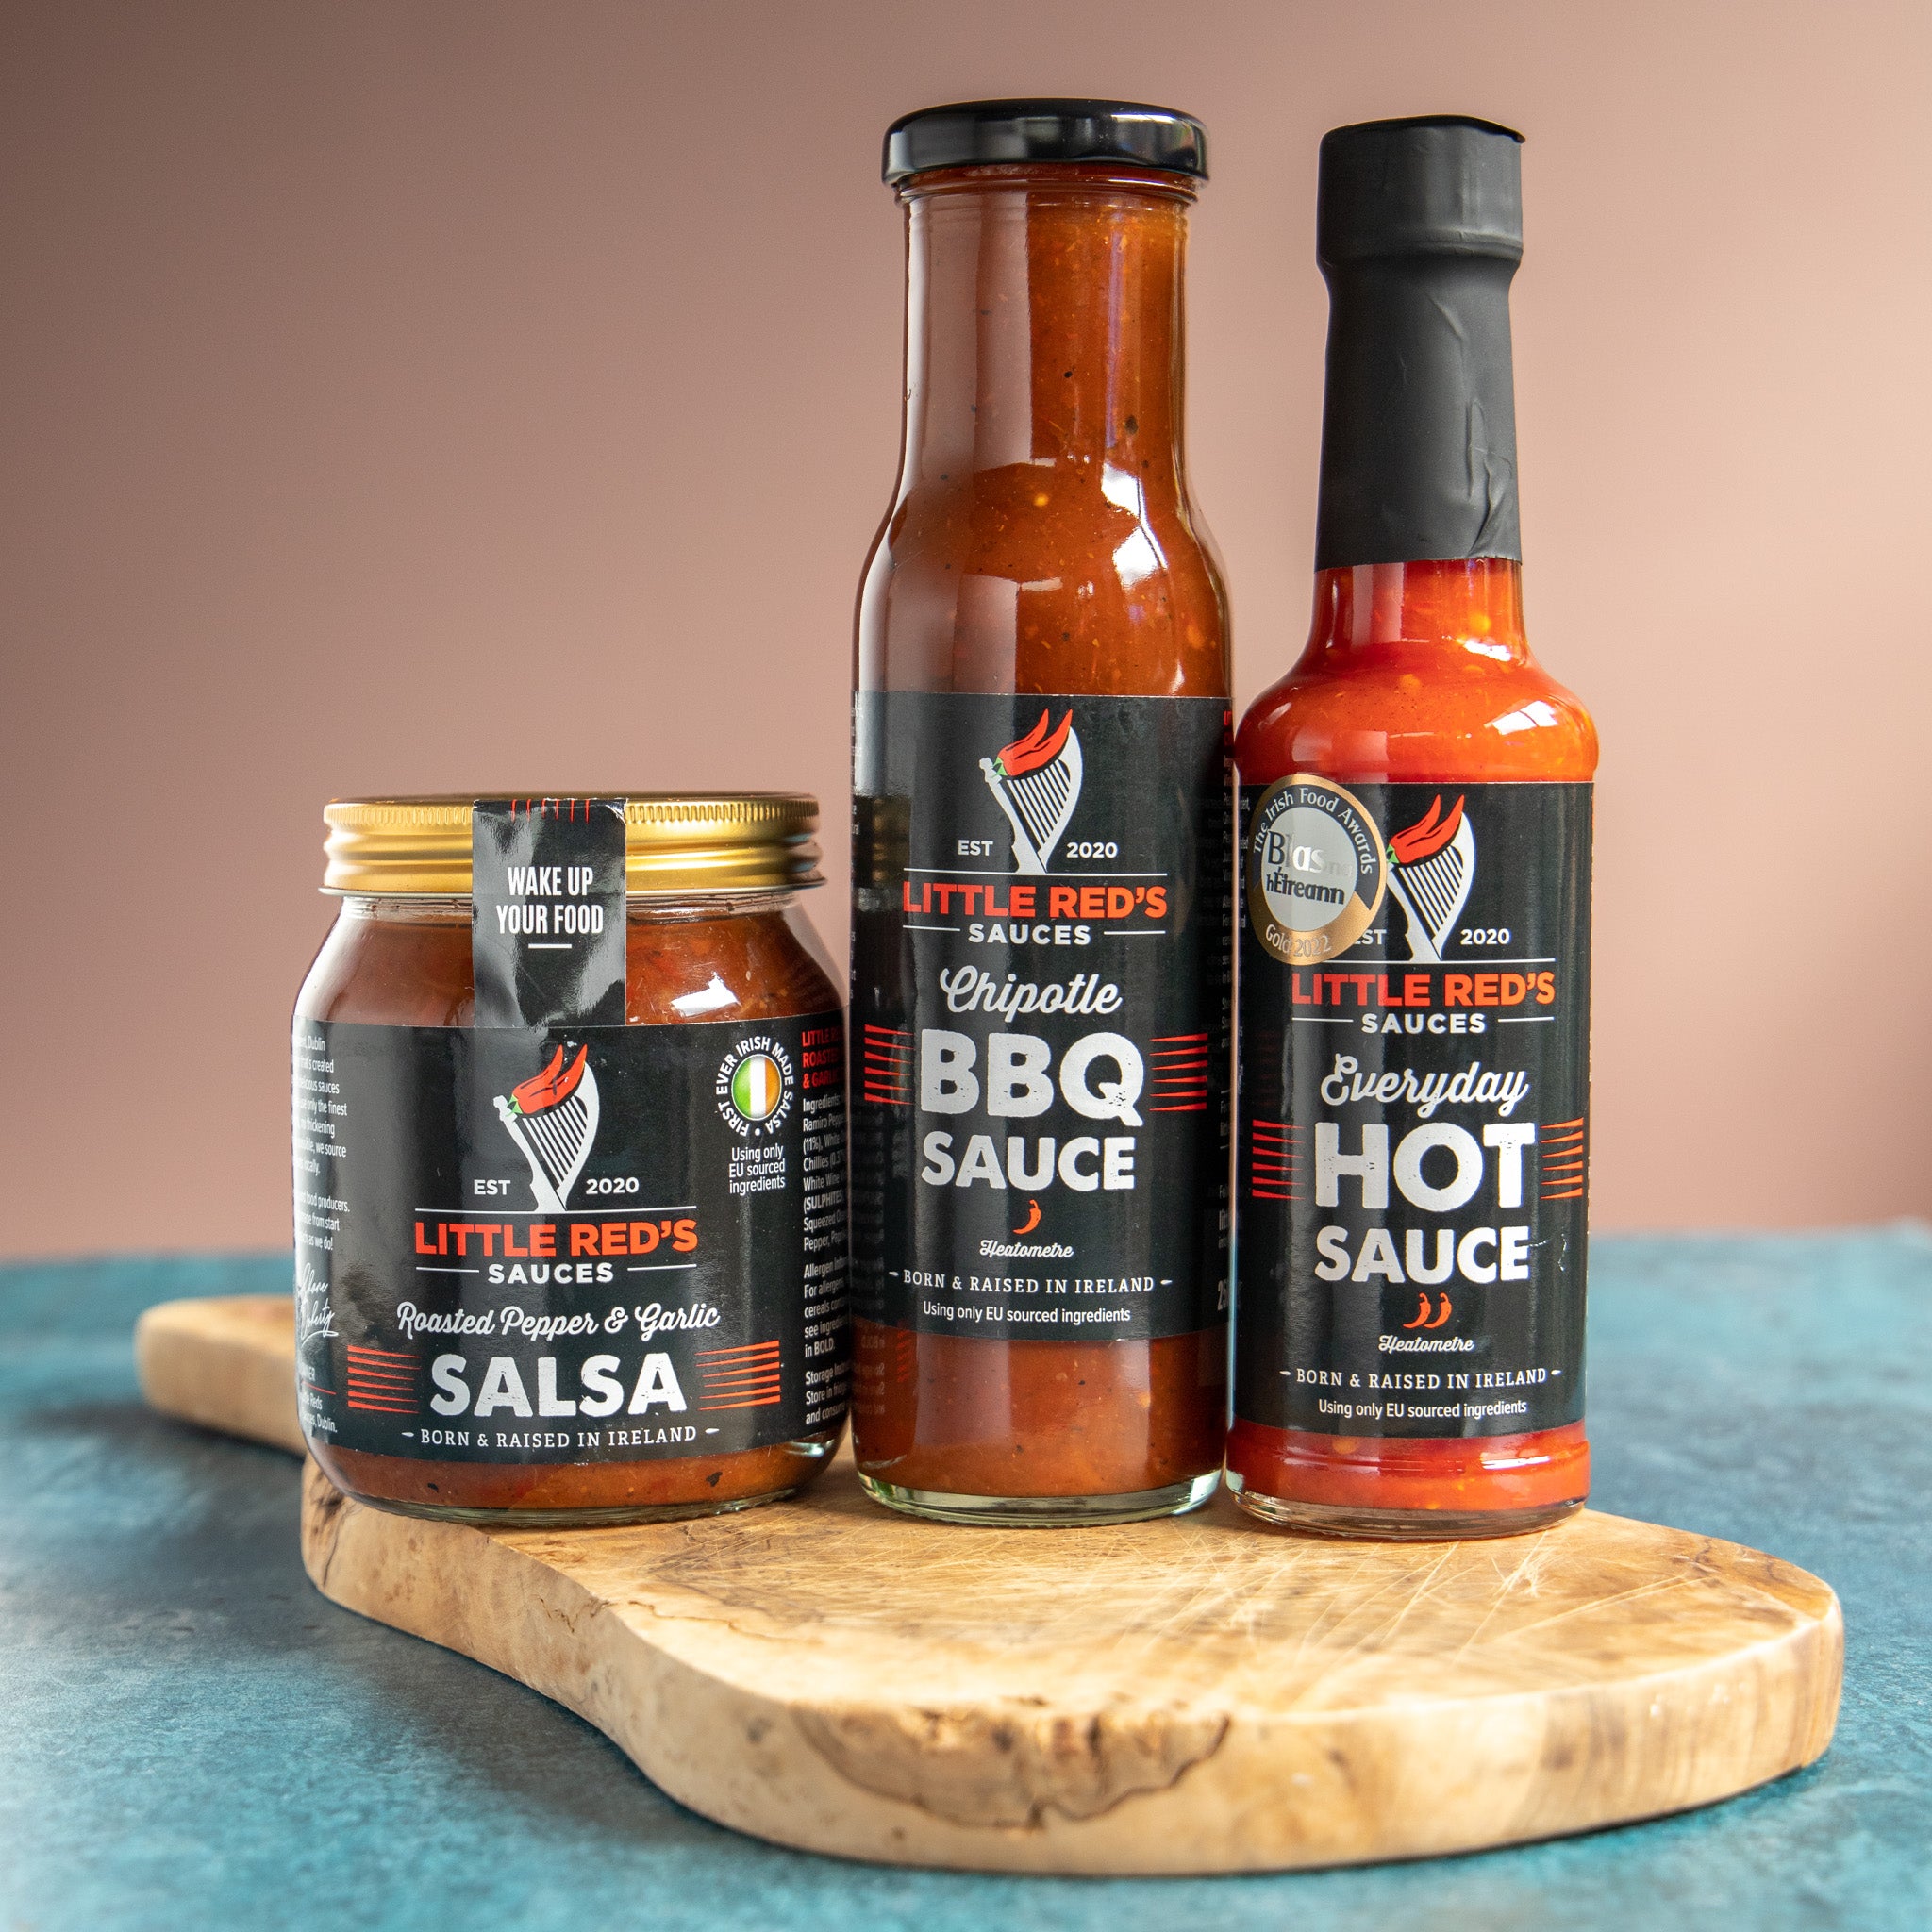 Little Red's Selection Box featuring three signature sauces displayed on a wooden chopping board. The image showcases the variety and distinct packaging of each sauce, highlighting their unique colors and labels, making an inviting visual for food enthusiasts and gift seekers.